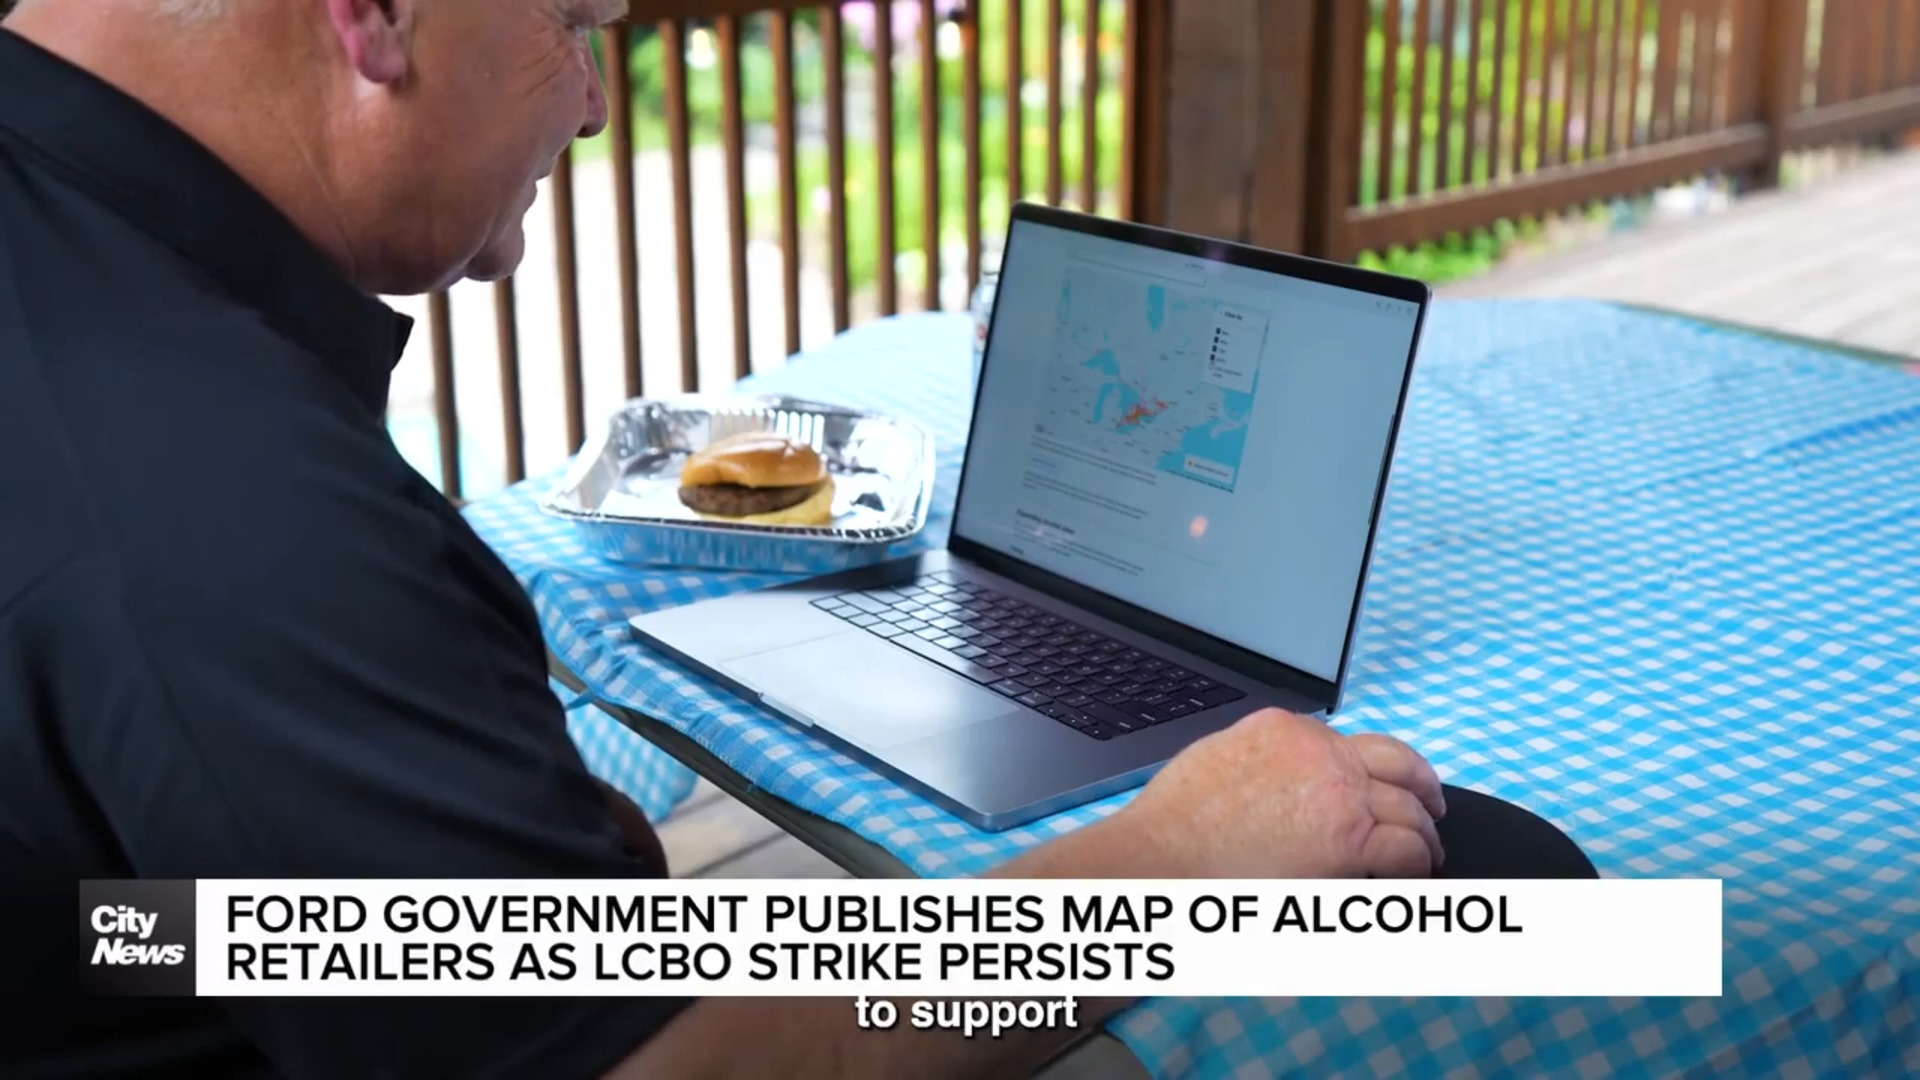 Ford government published map of alcohol retailers as LCBO strike persists